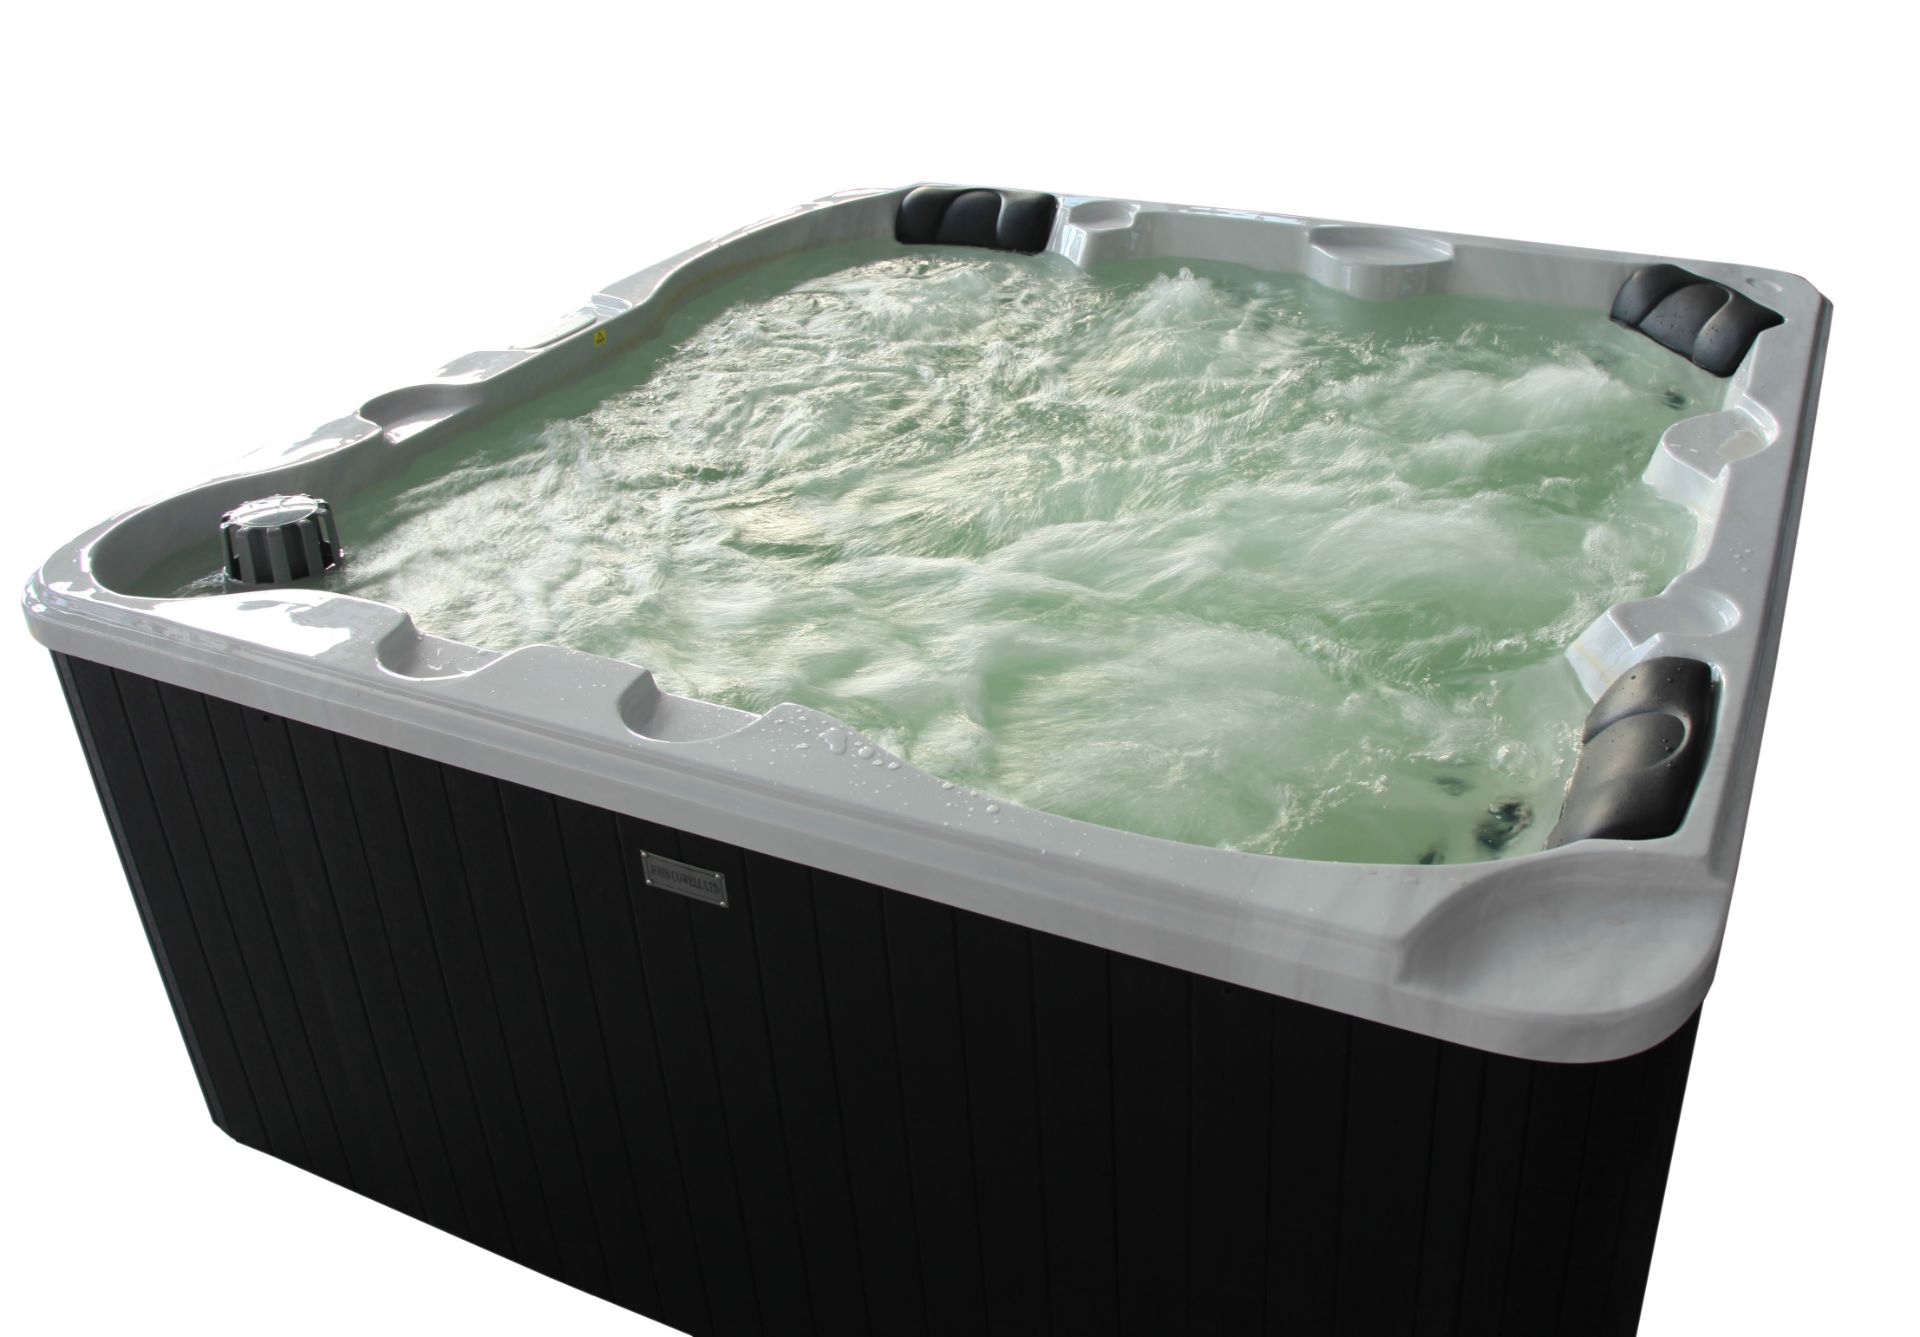 HIGH QUALITY NEW PACKAGED 2019 HOT TUB, MATCHING STEPS, SIDE, INSULATING COVER, TOP USA RUNNING GEAR